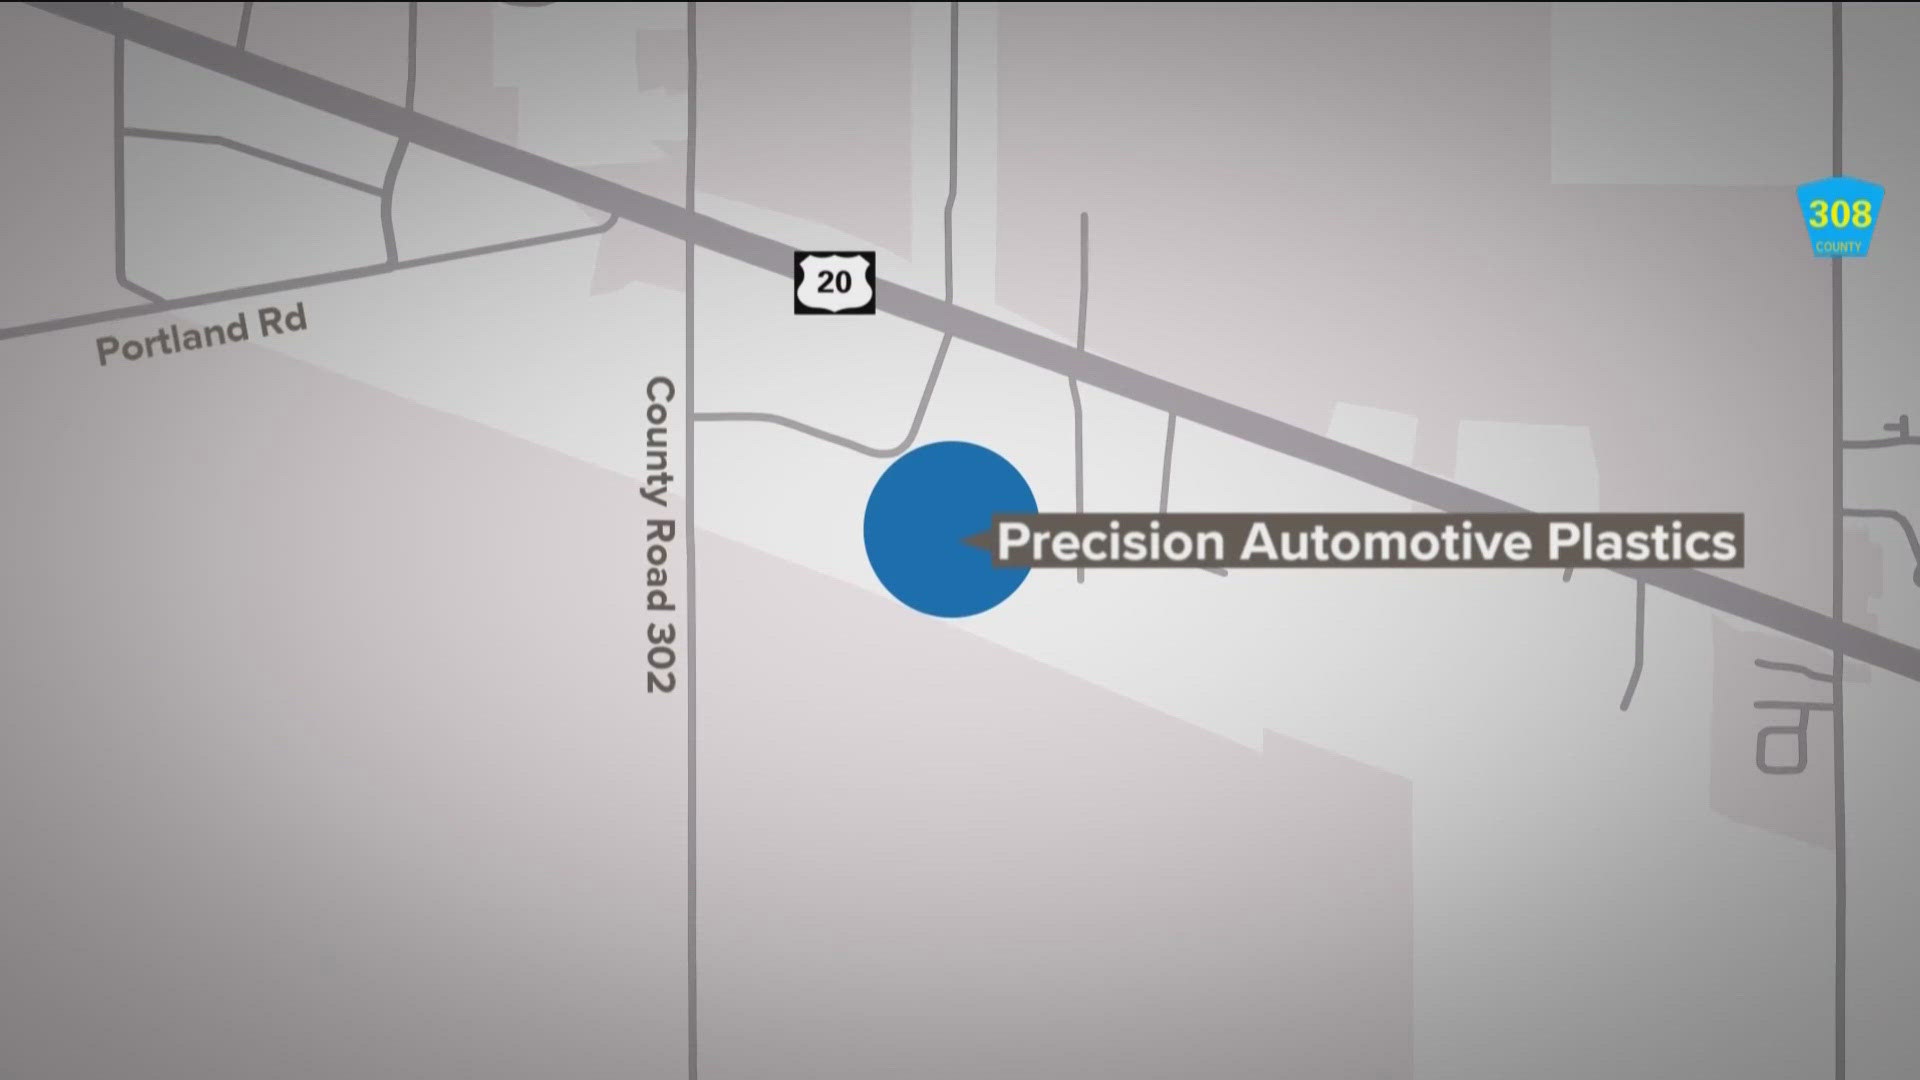 The Bellevue Fire Department said an employee of Precision Automotive Plastics was pinned under a piece of molding equipment and pronounced dead at the scene.